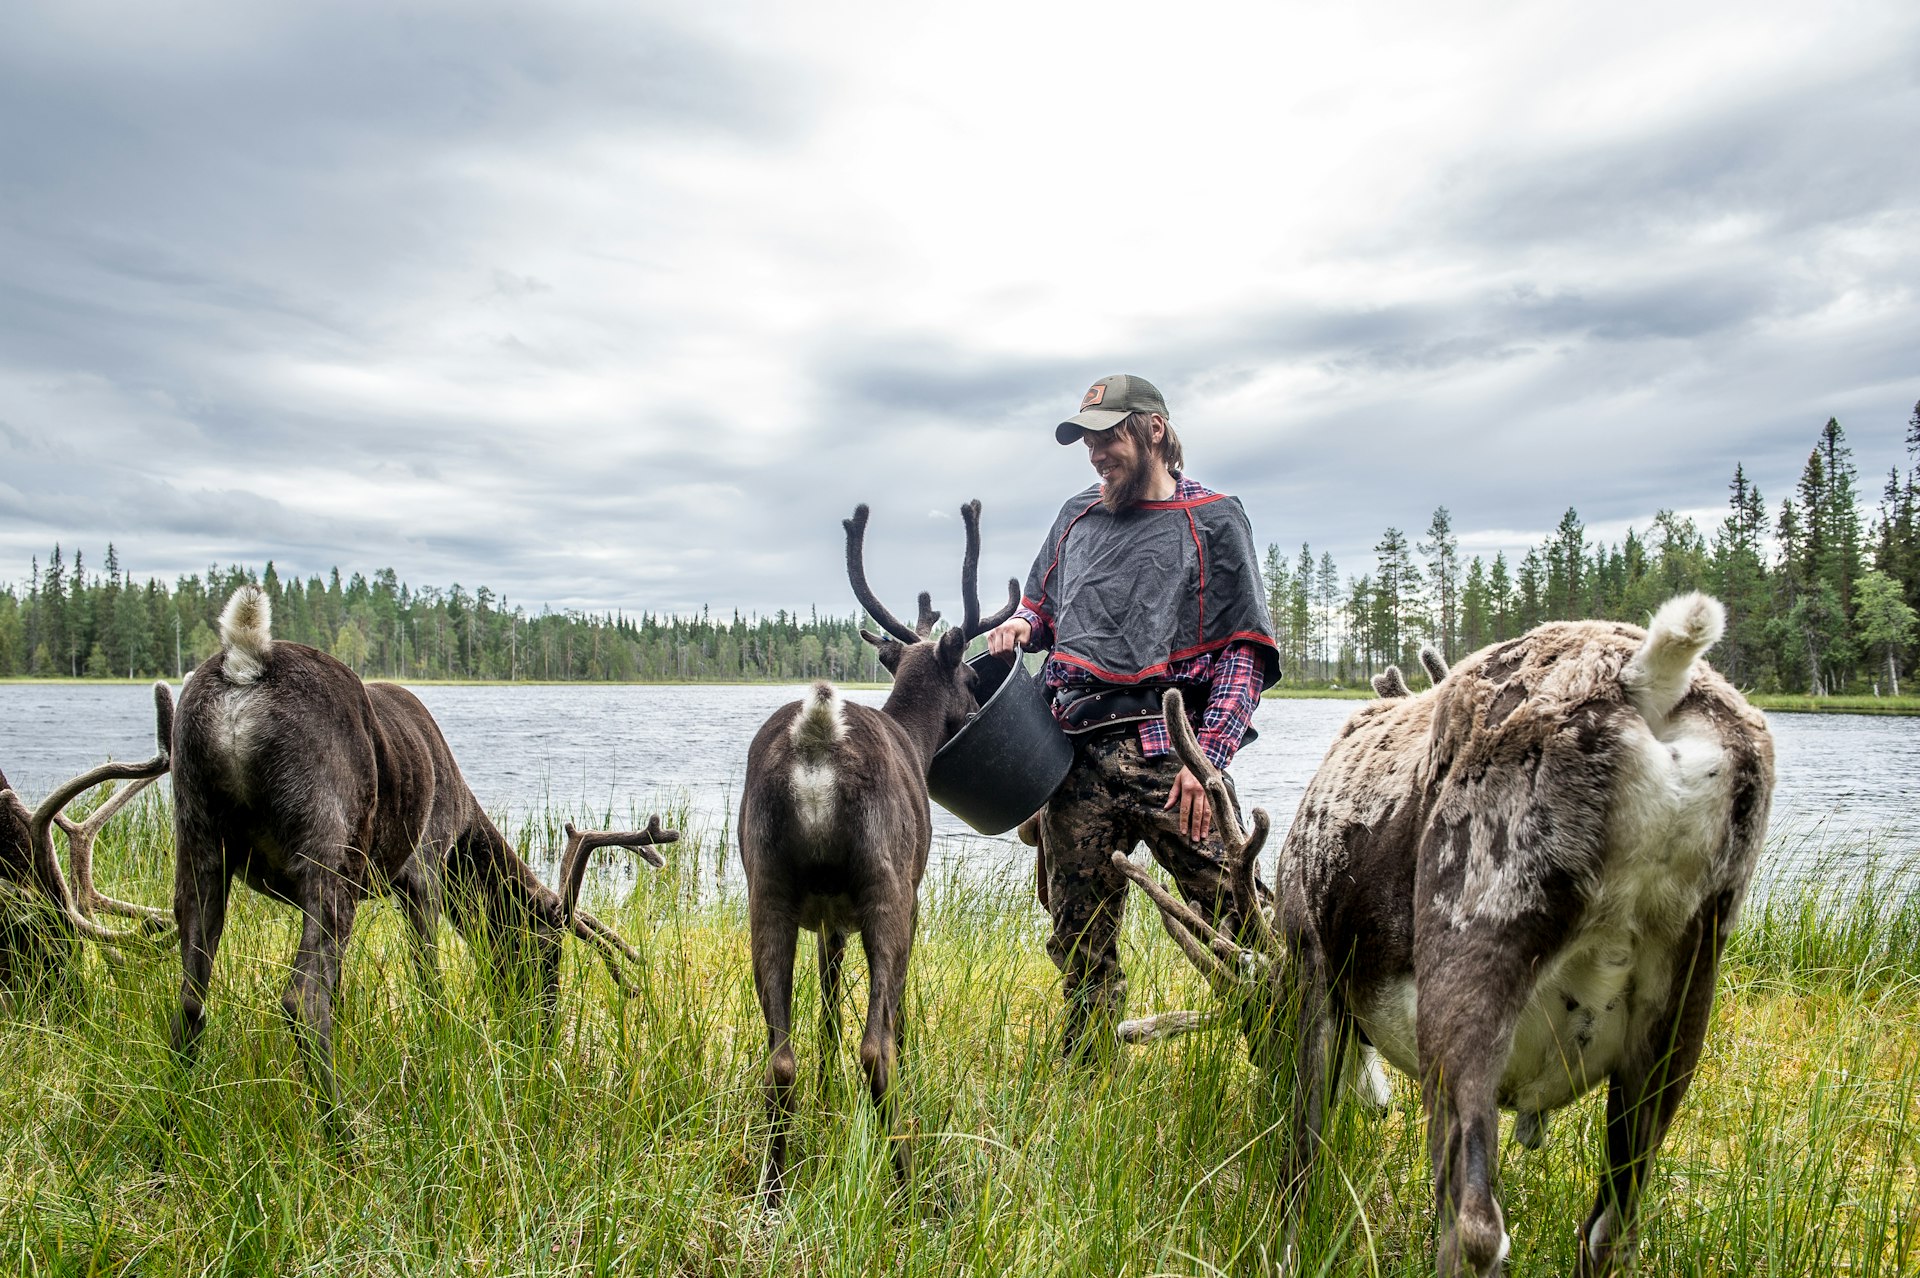 A young man feeds reindeer in a field by a lake in Salla, Lapland, Finland